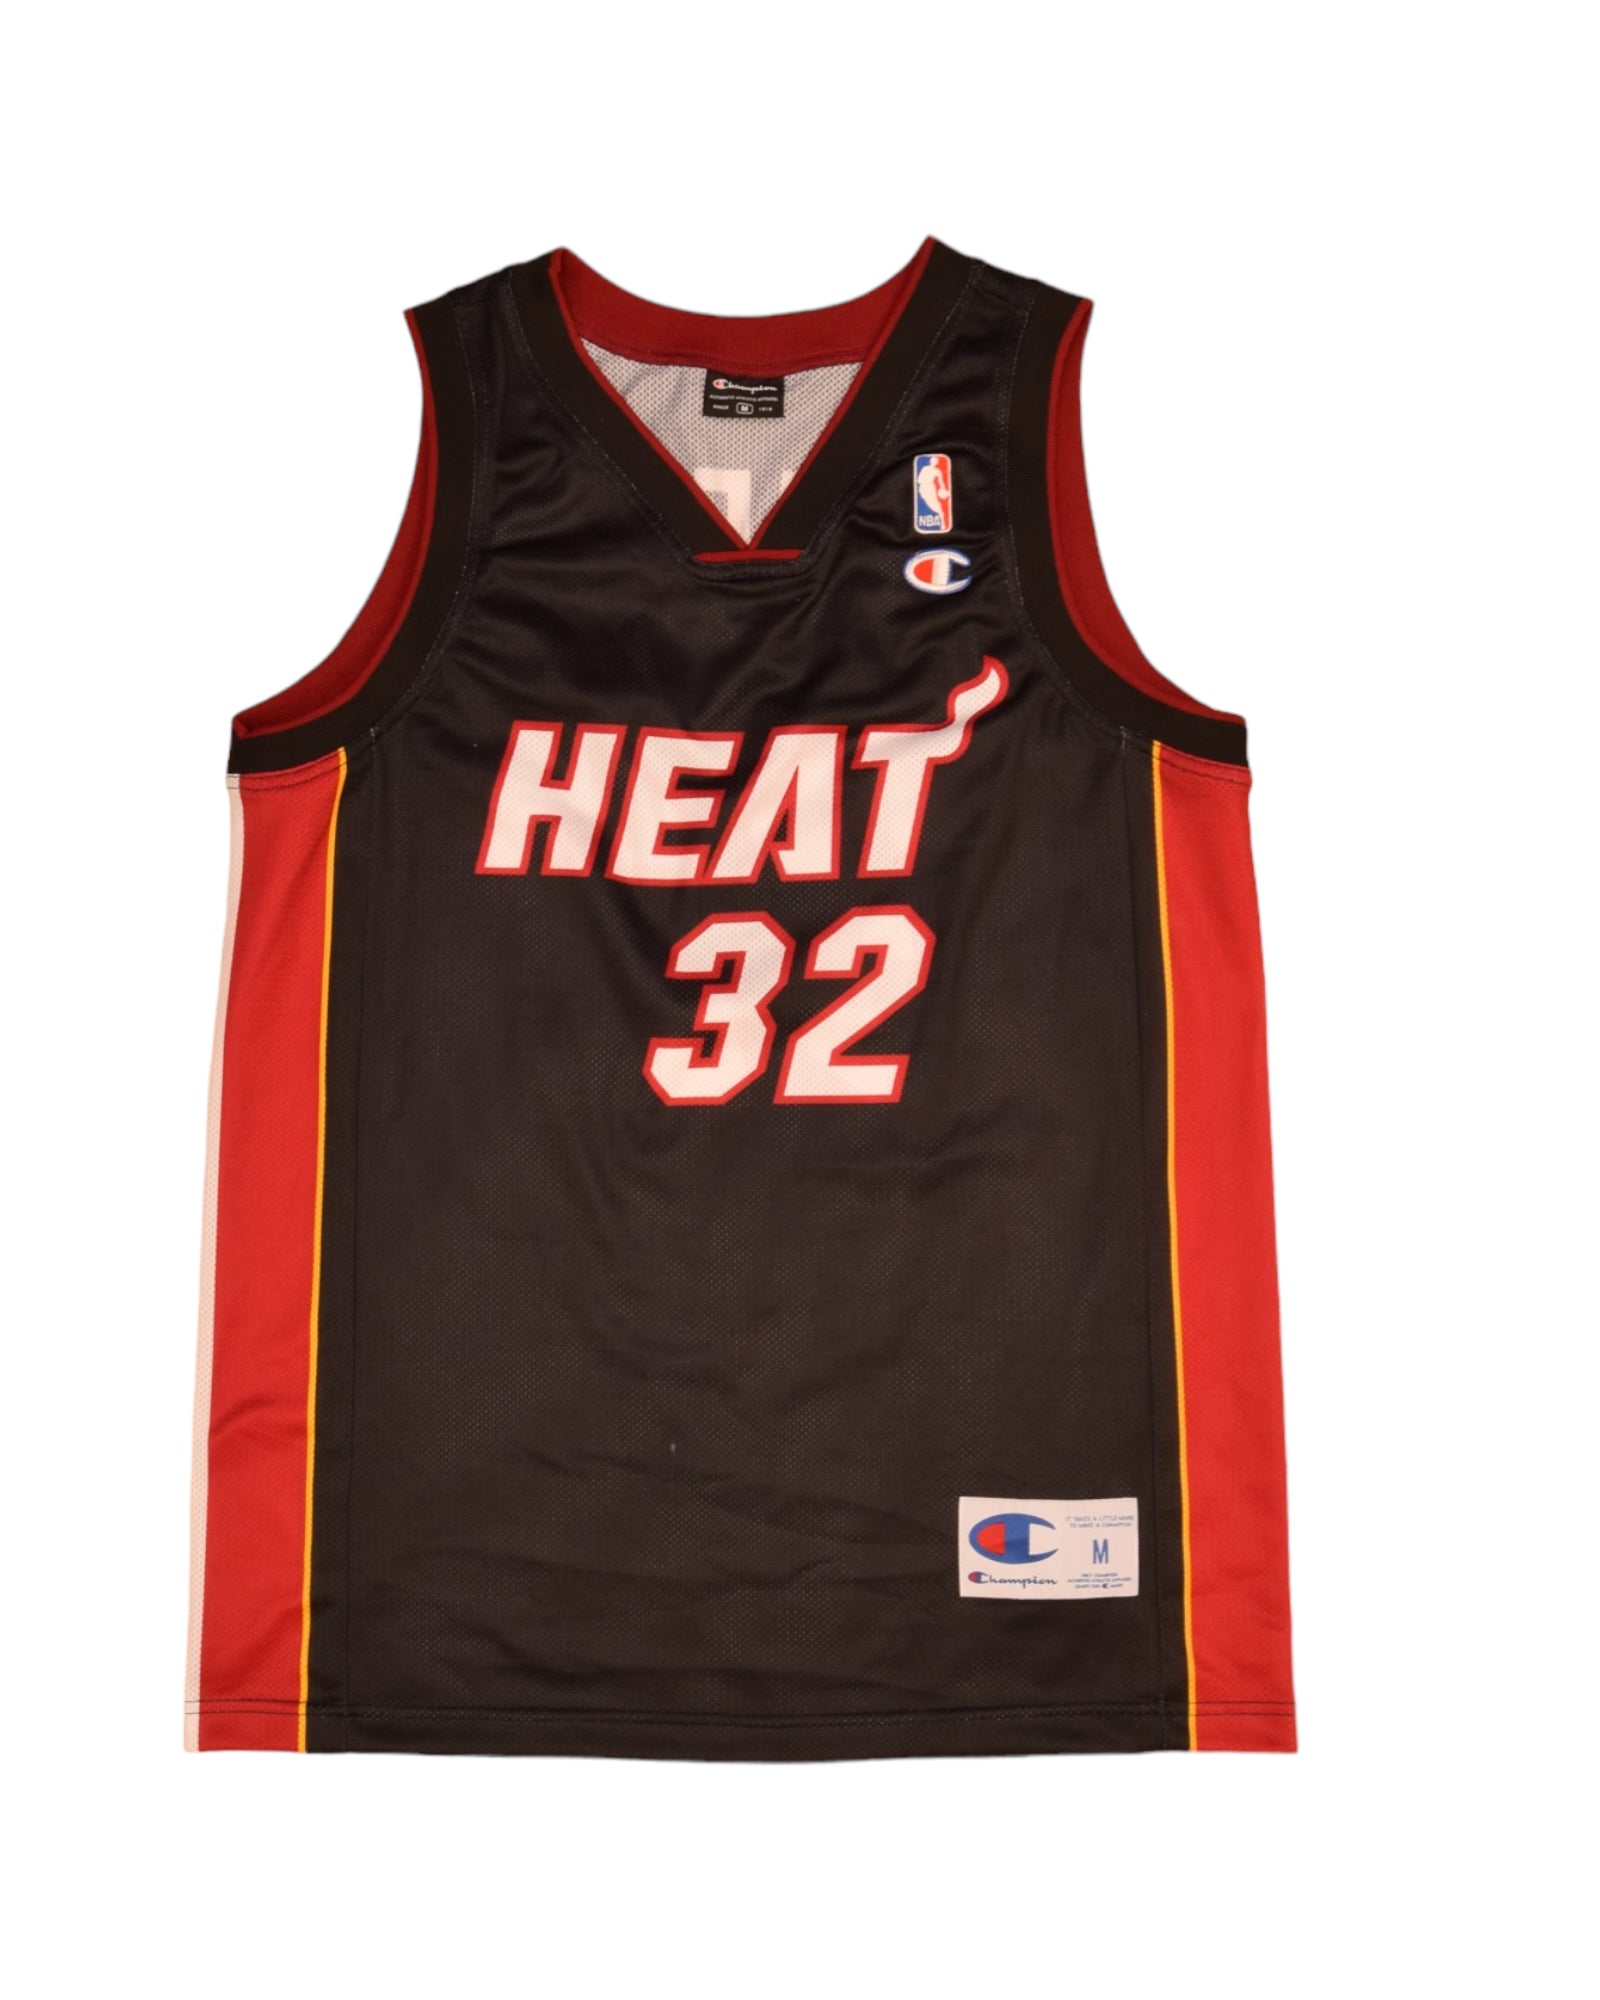 Miami Heat Shaquille O'Neal Champion #32 NBA Basketball Away Jersey 2004 - 2007 Size M Black Red White